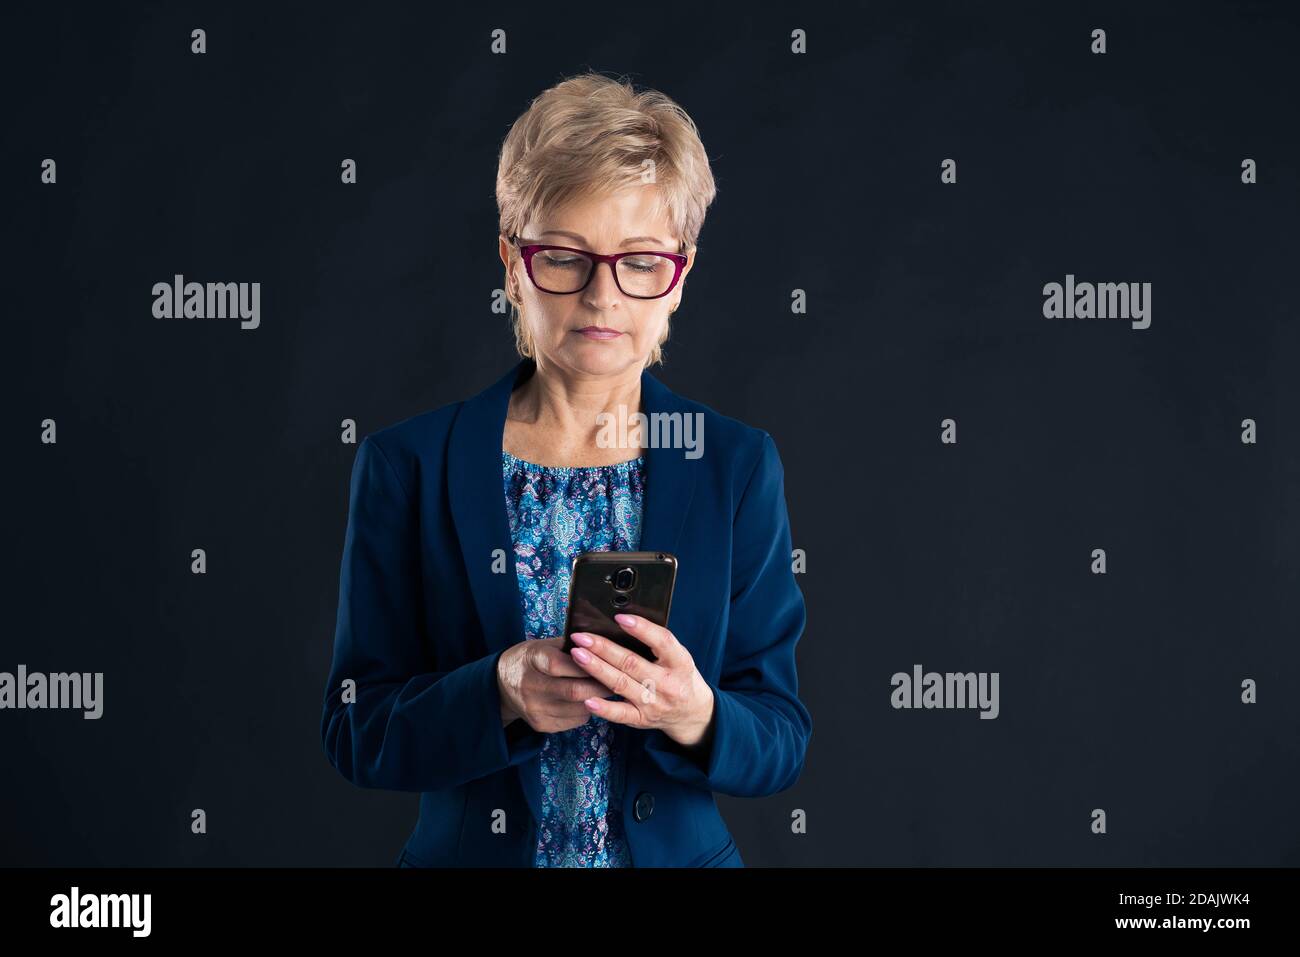 Older businesswoman texting on her mobile phone on a dark background Stock Photo